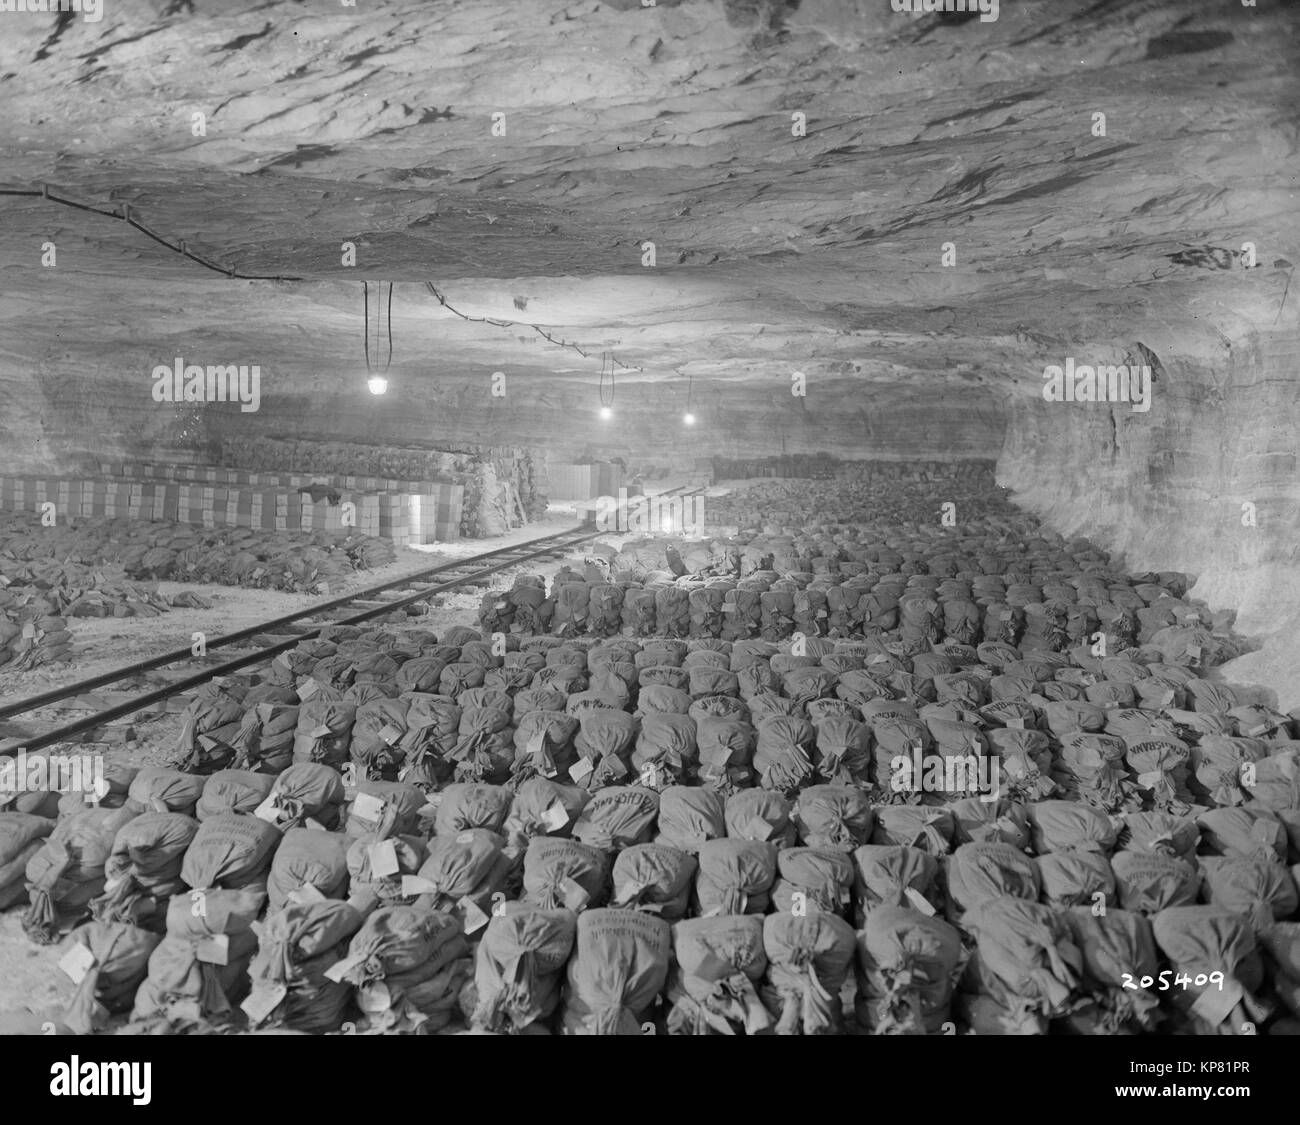 Germany. The 90th Division, the U.S. Third Army, discovered this Reichsbnk wealth, SS loot, and Berlin museum paintings that were removed from Berlin to a salt mine vault in Merkers, Germany. 04/15/1945 RG-111-SC-205409.tif Stock Photo